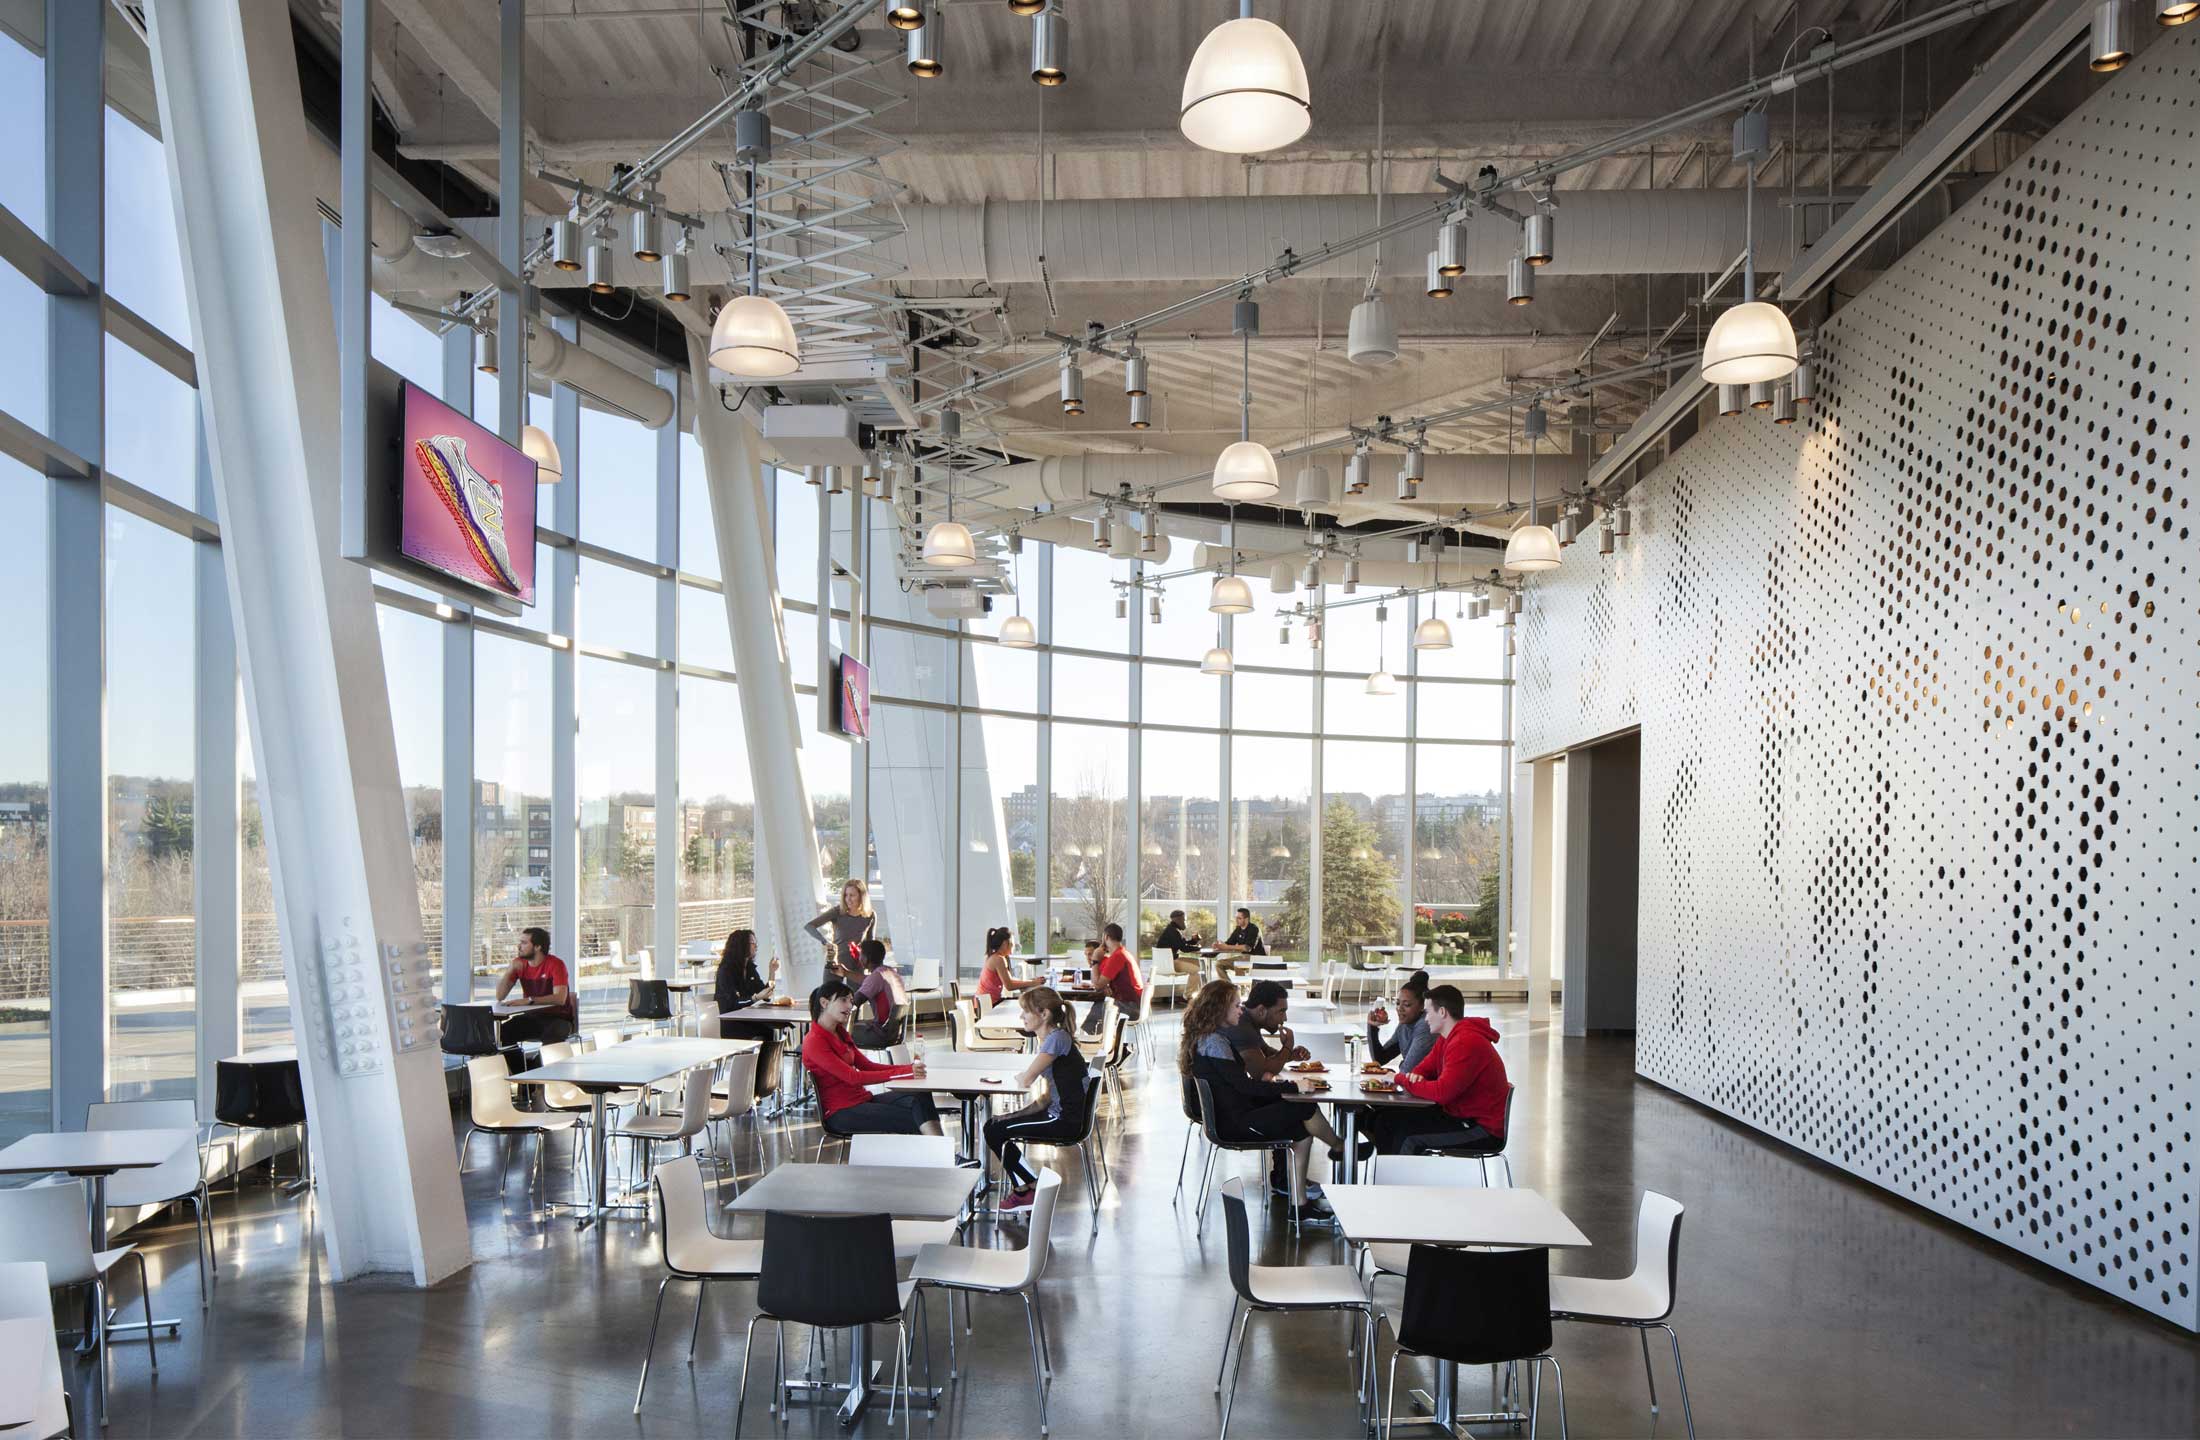 New Balance HQ Cafeteria